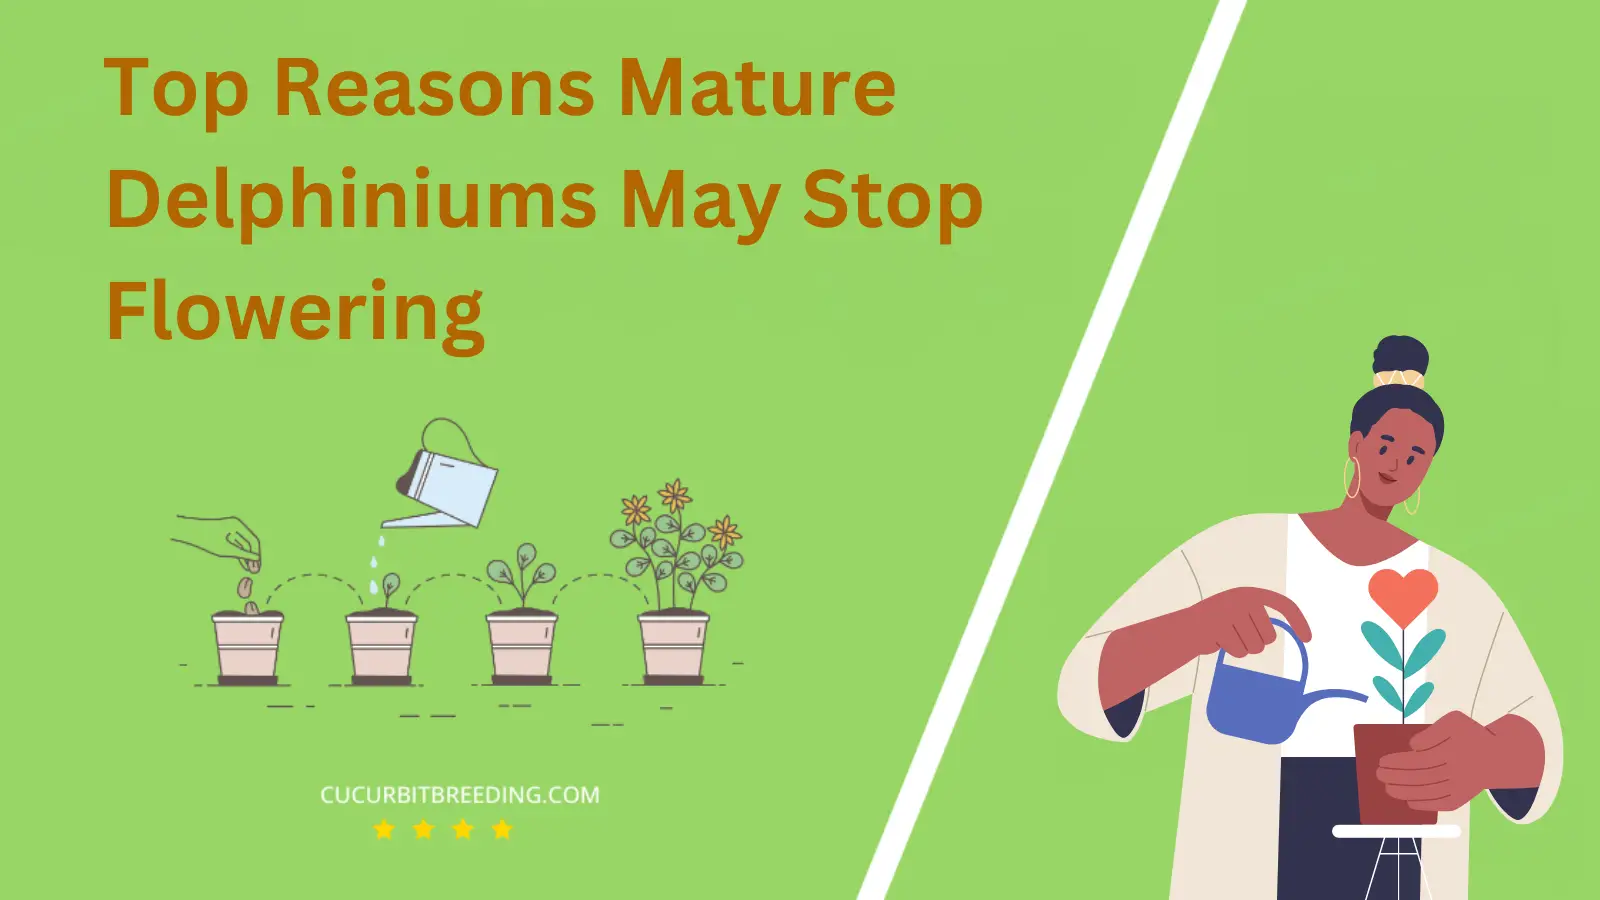 Top Reasons Mature Delphiniums May Stop Flowering